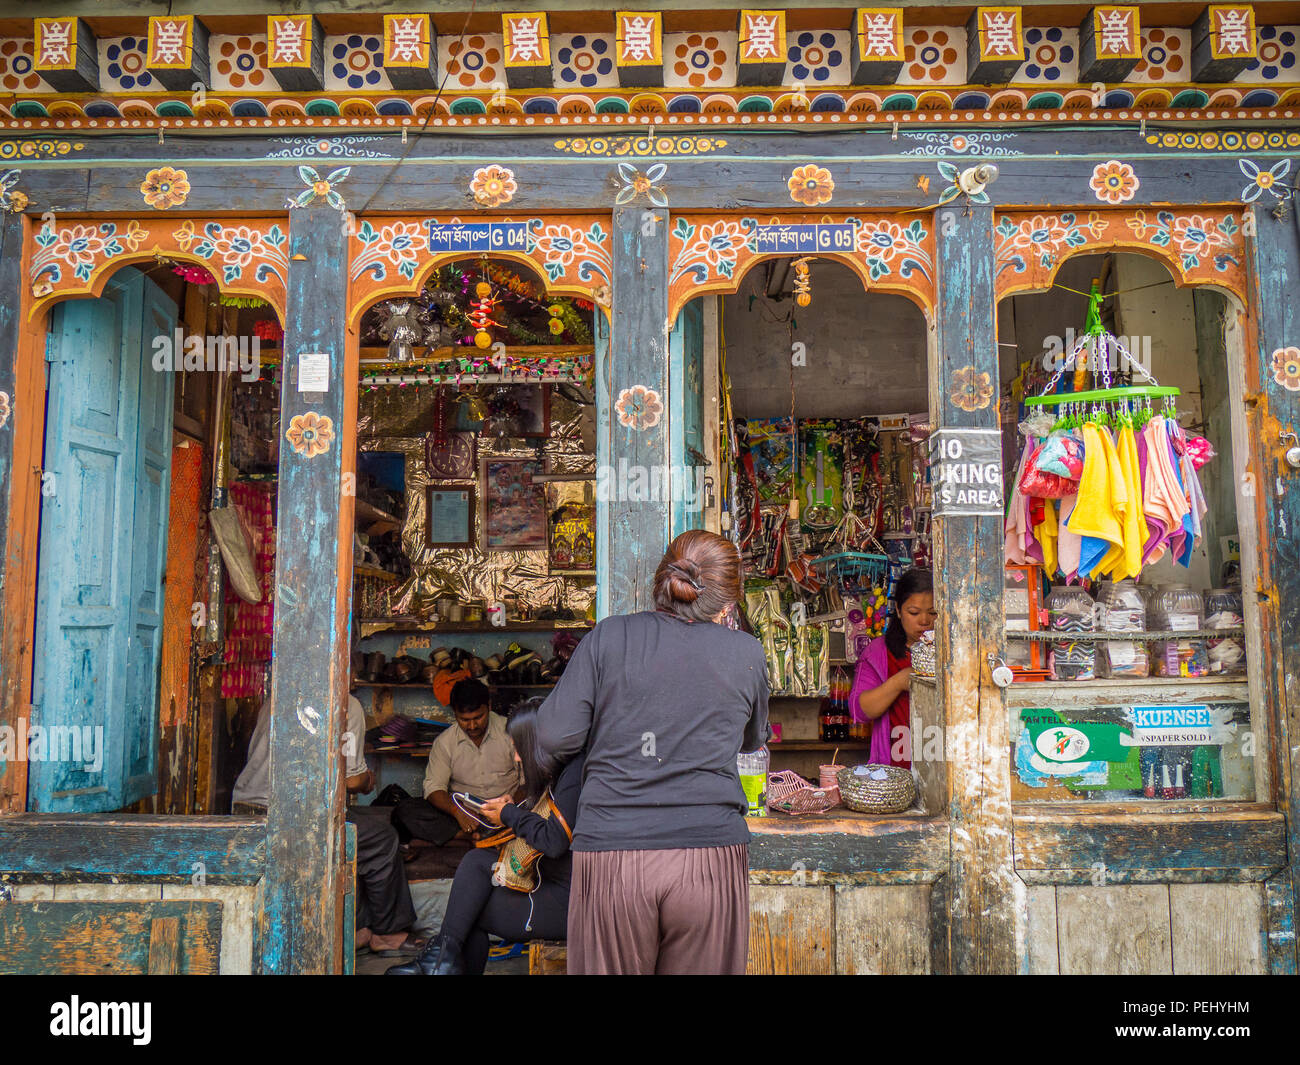 A local small grocery store in Paro Bhutan Stock Photo